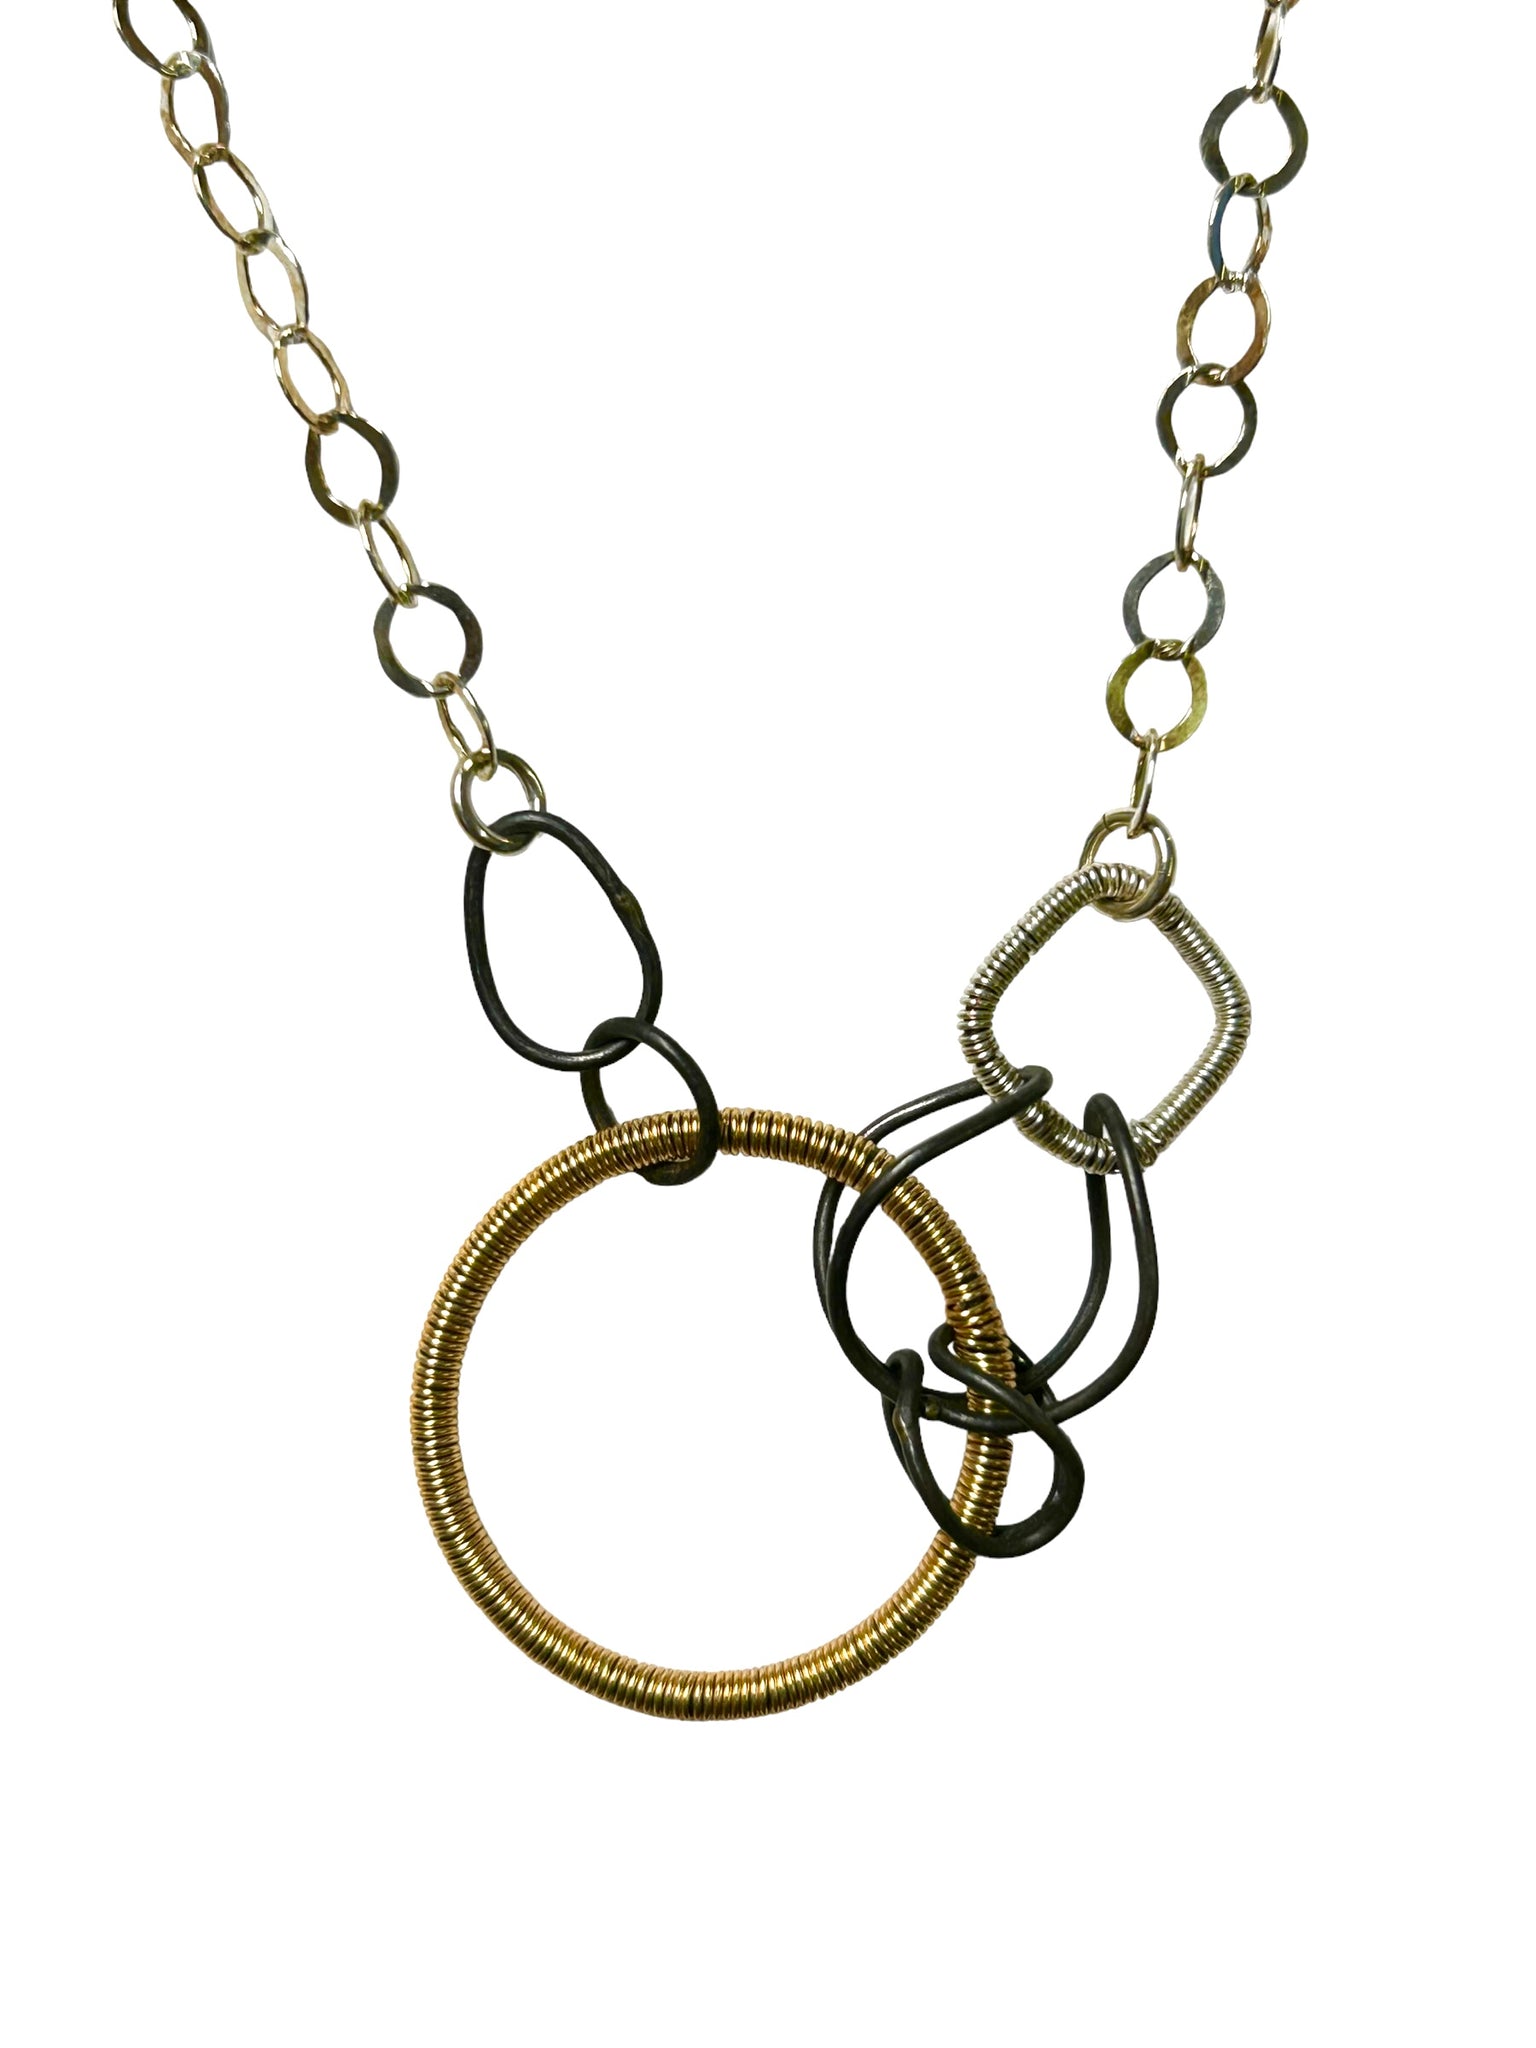 Integral Ring Wire-Wrapped Necklace